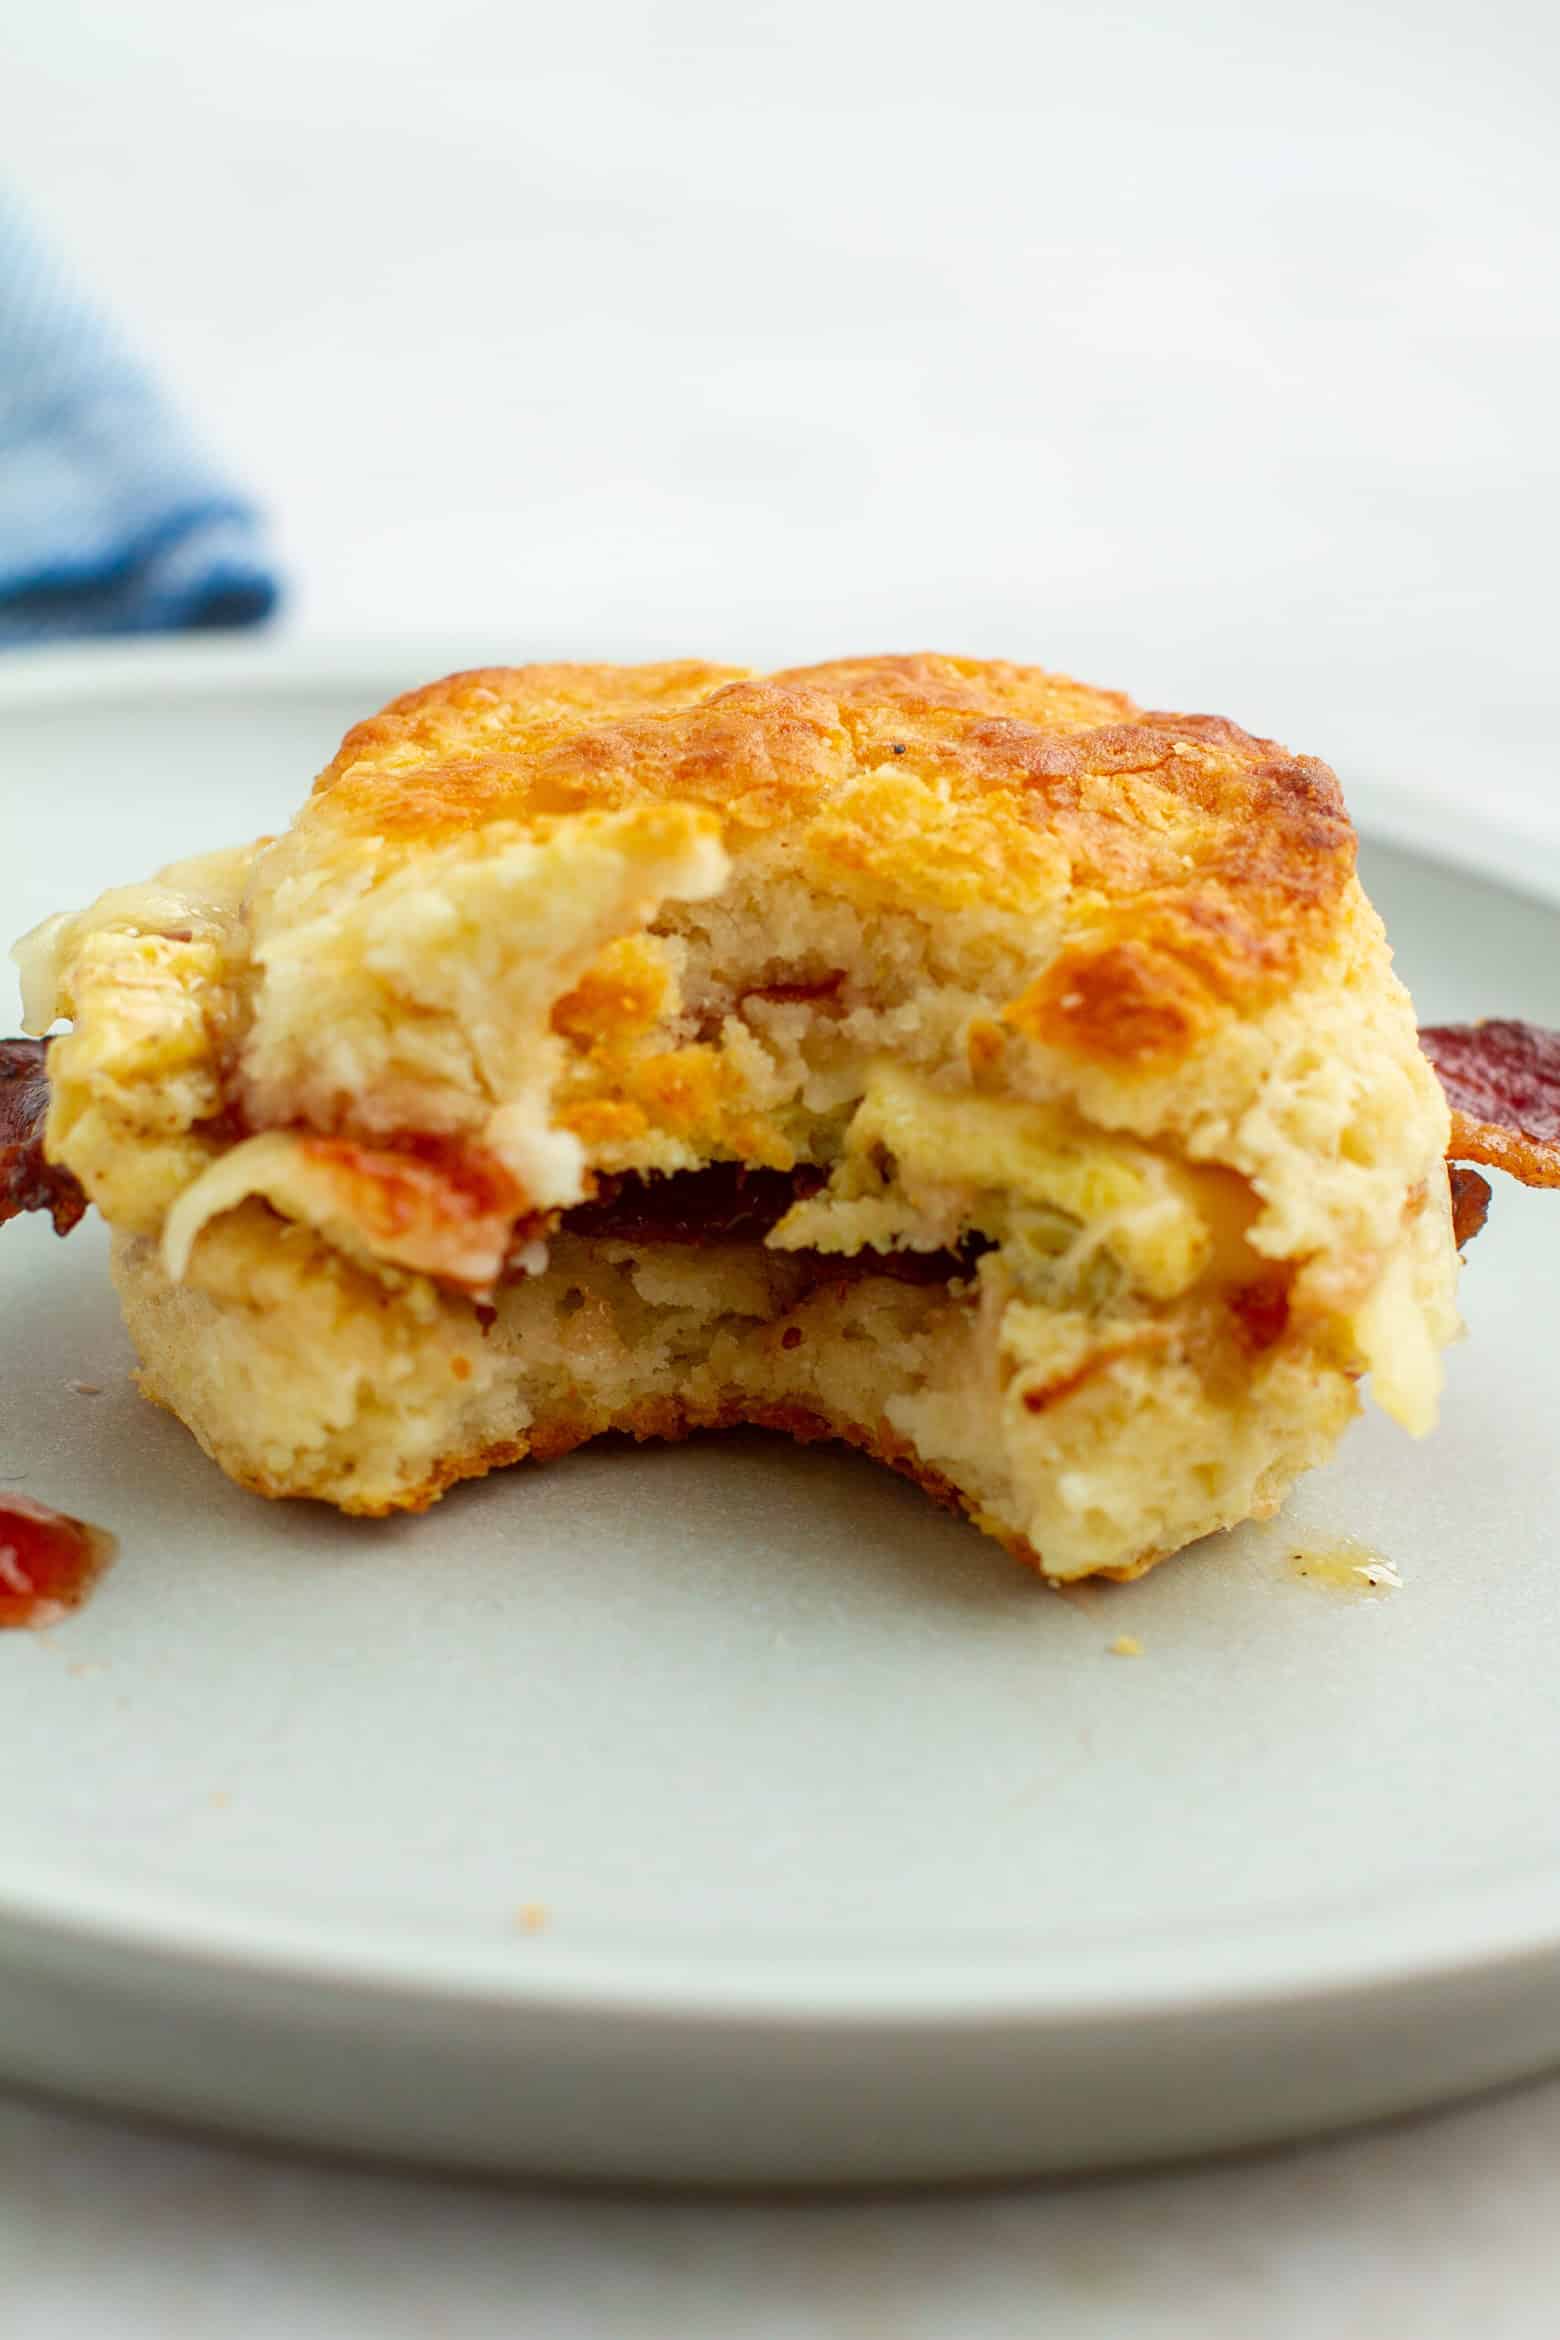 bacon egg and cheese biscuit with a bite taken out.